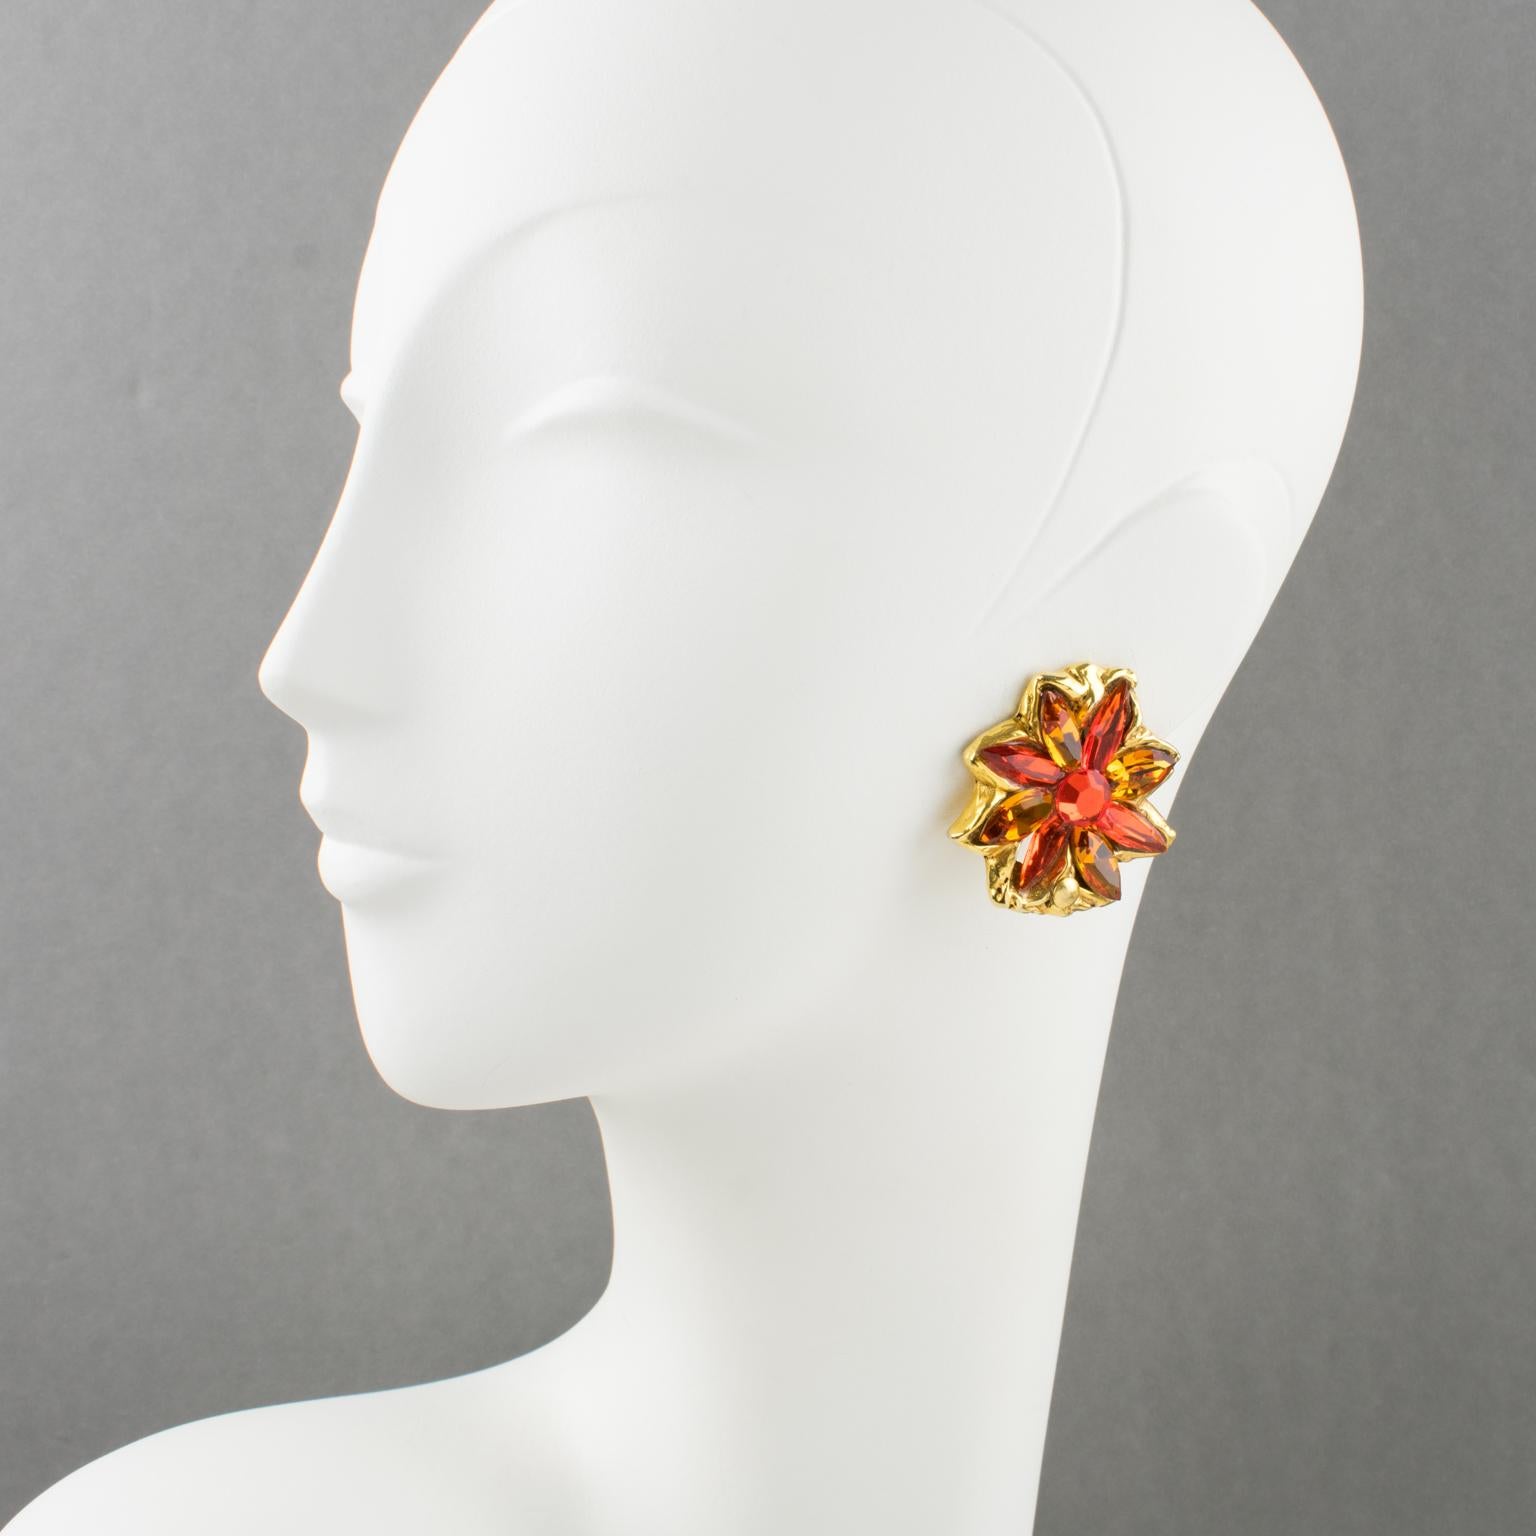 These elegant Kalinger Paris floral clip-on earrings feature an oversized flower shape with shiny gilt metal framing topped with fire orange and honey faceted crystal rhinestones. They are signed at the back with the gilded logo Kalinger.
Good